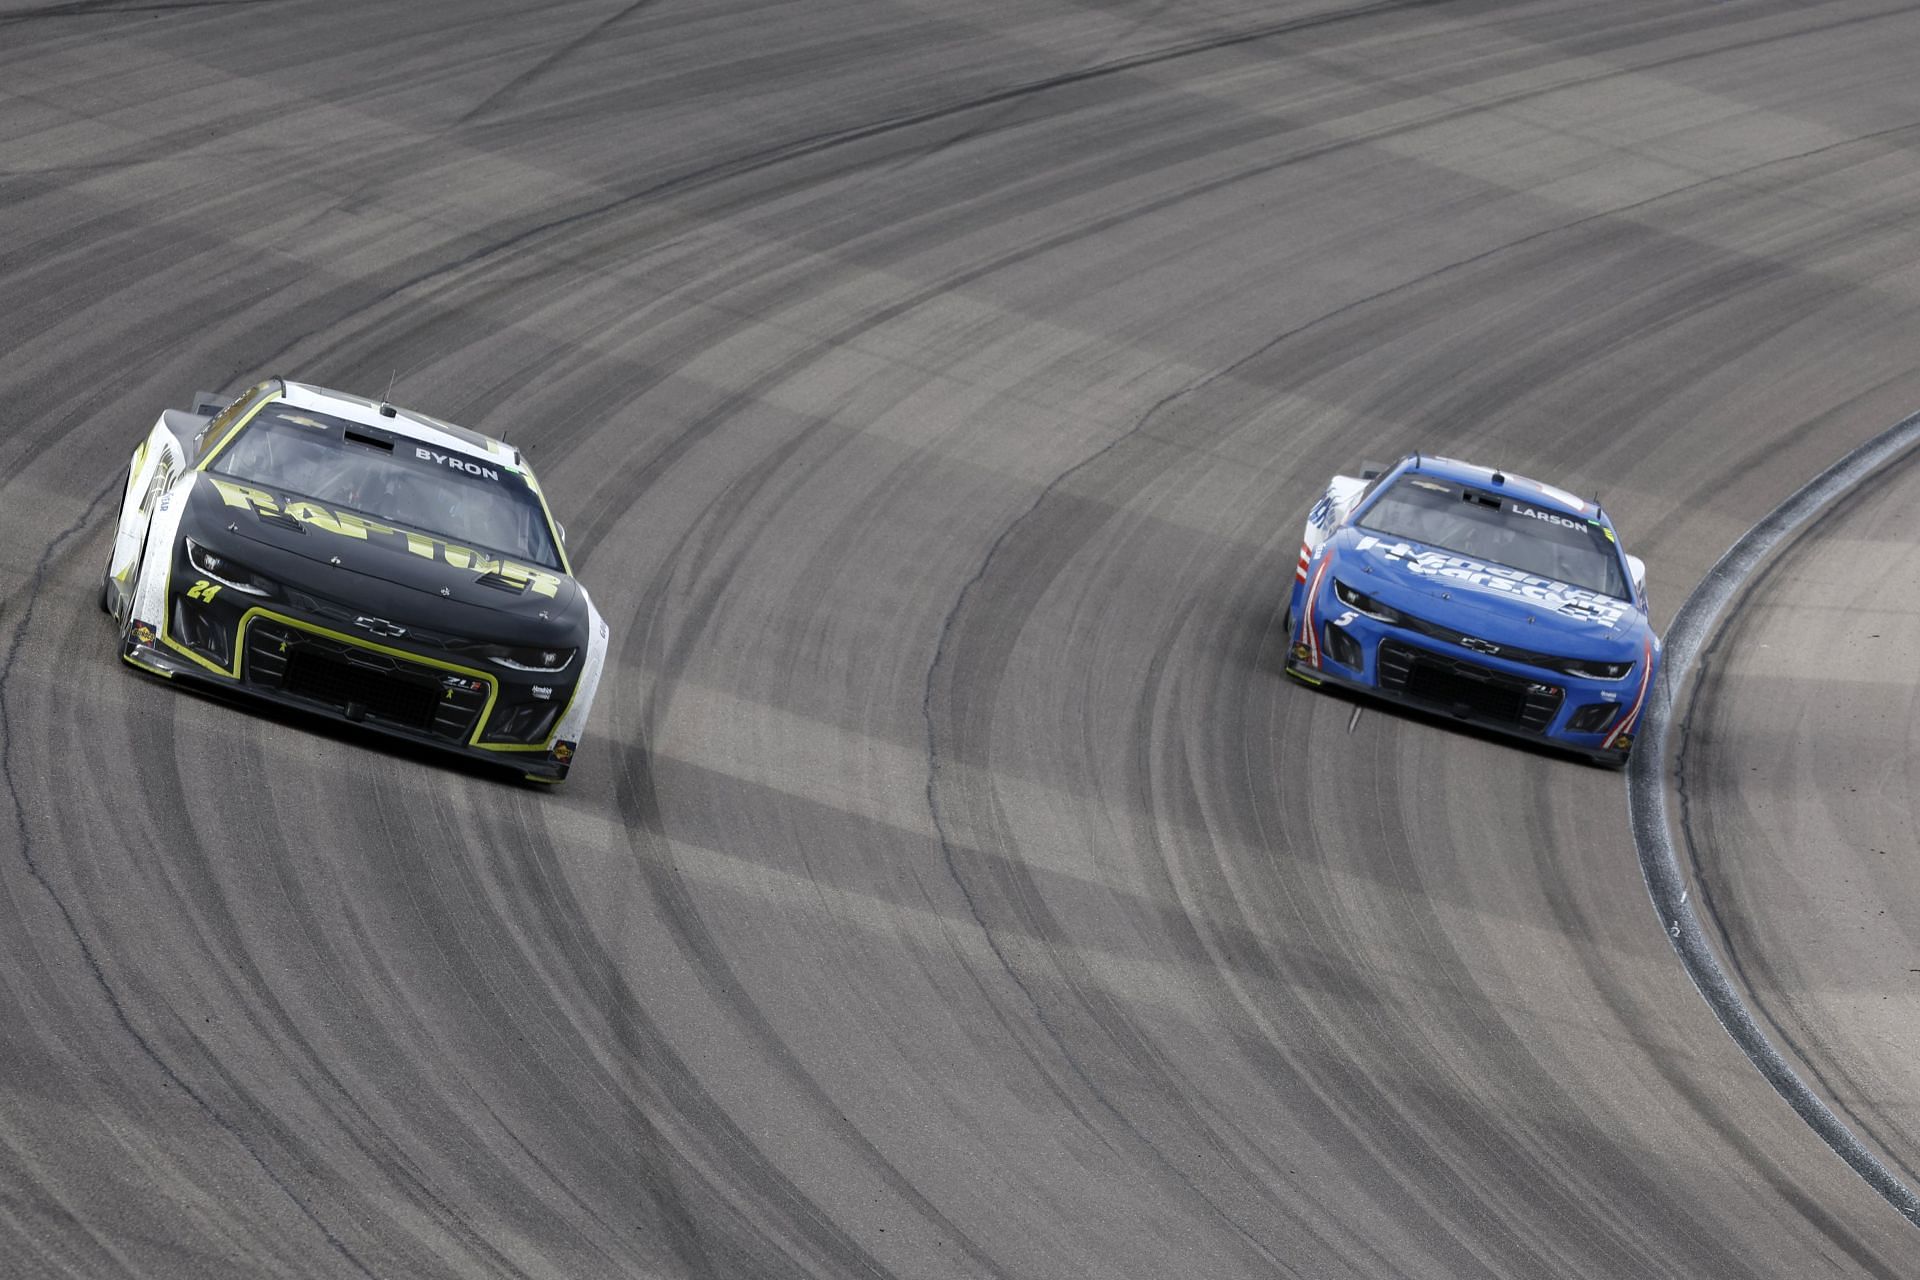 Hendrick comes up aces in Vegas